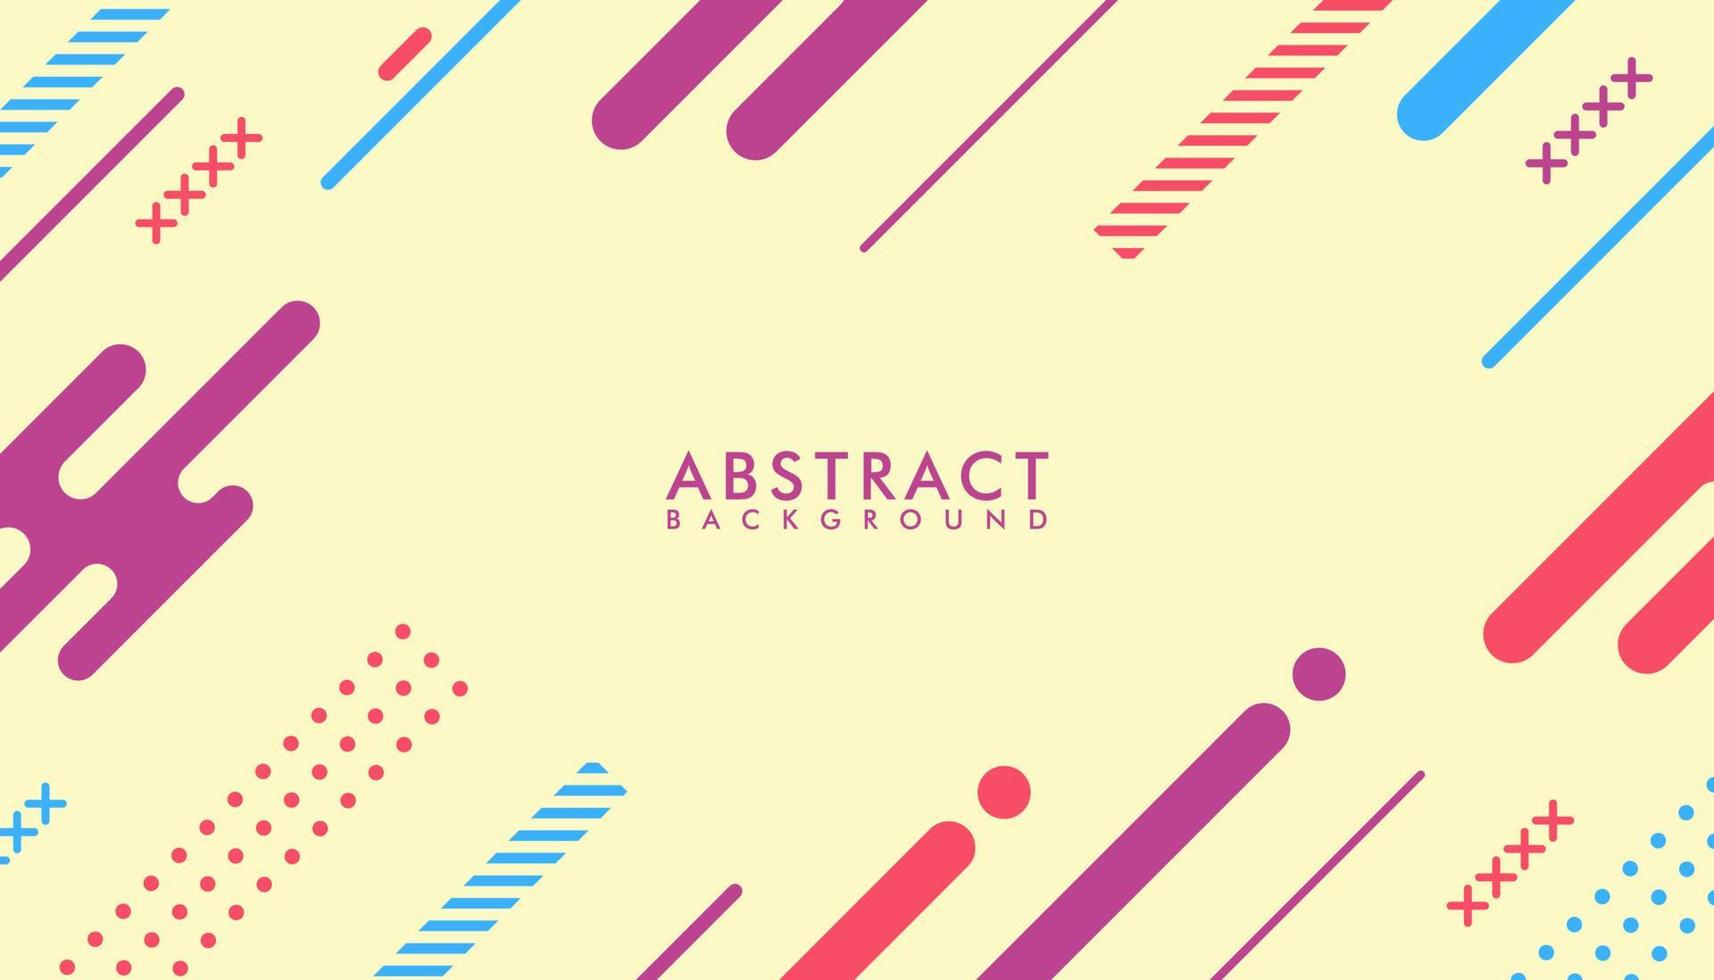 Abstract geometric background with colorful vector